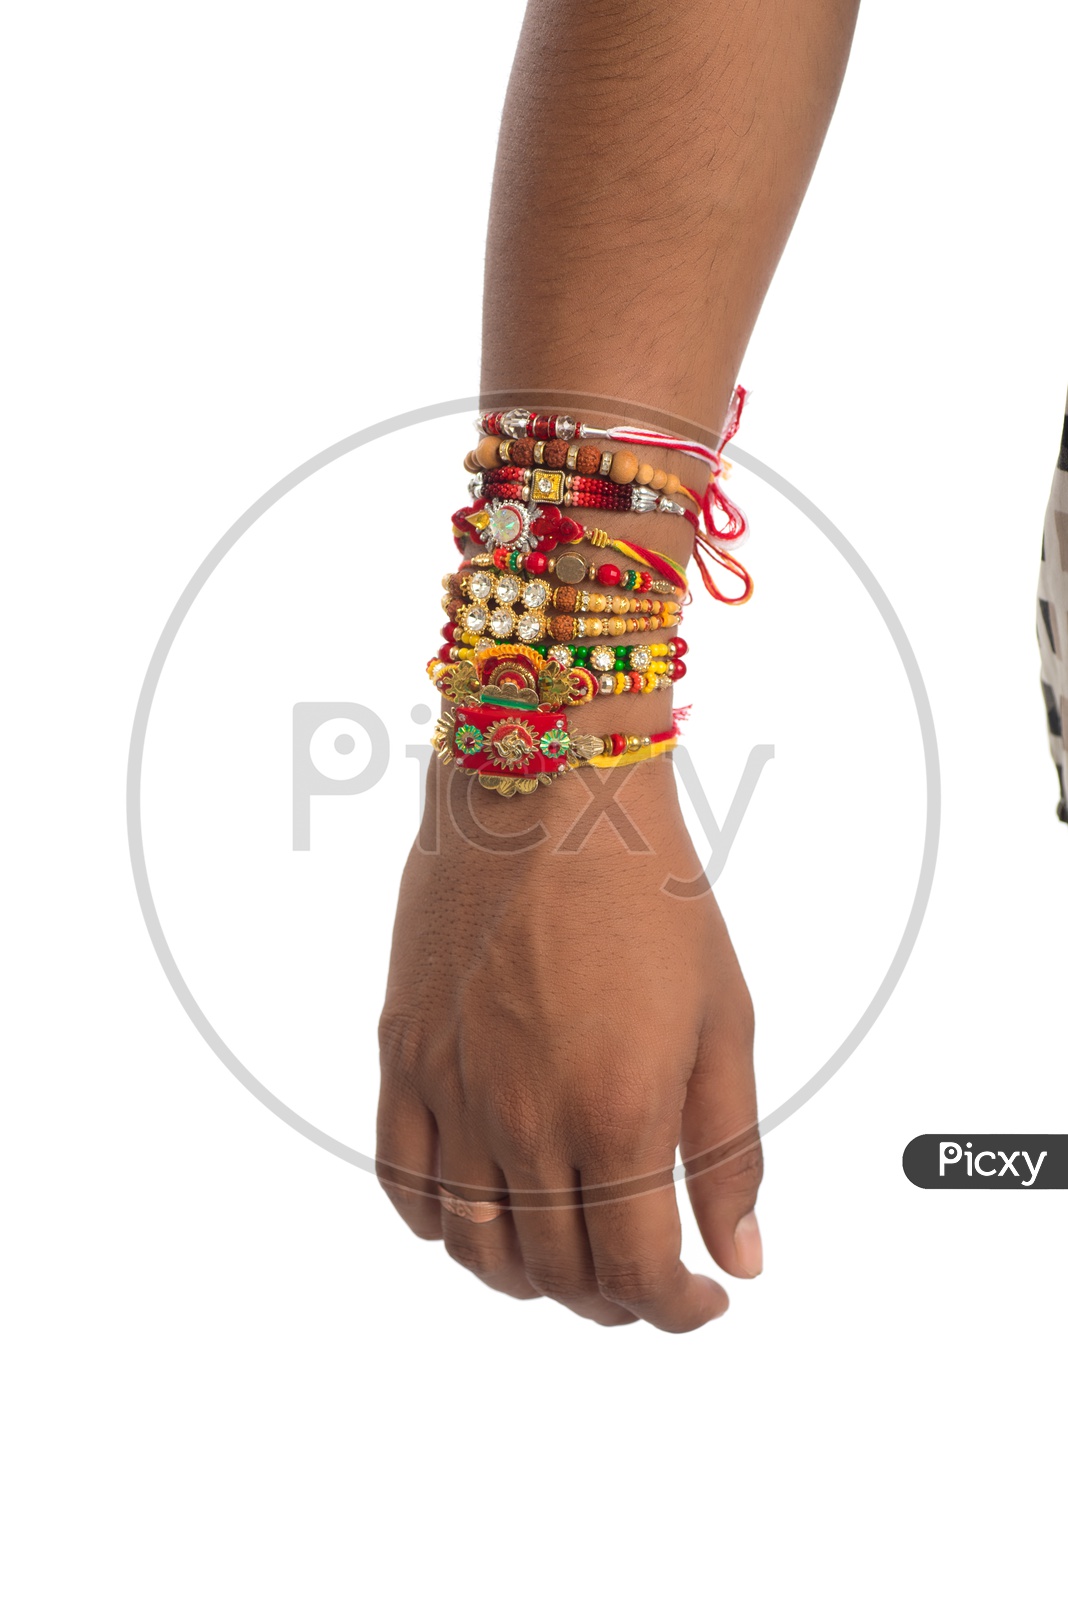 Indian Young Man Hand Tied With Elegant Rakhis  On an Isolated White Background